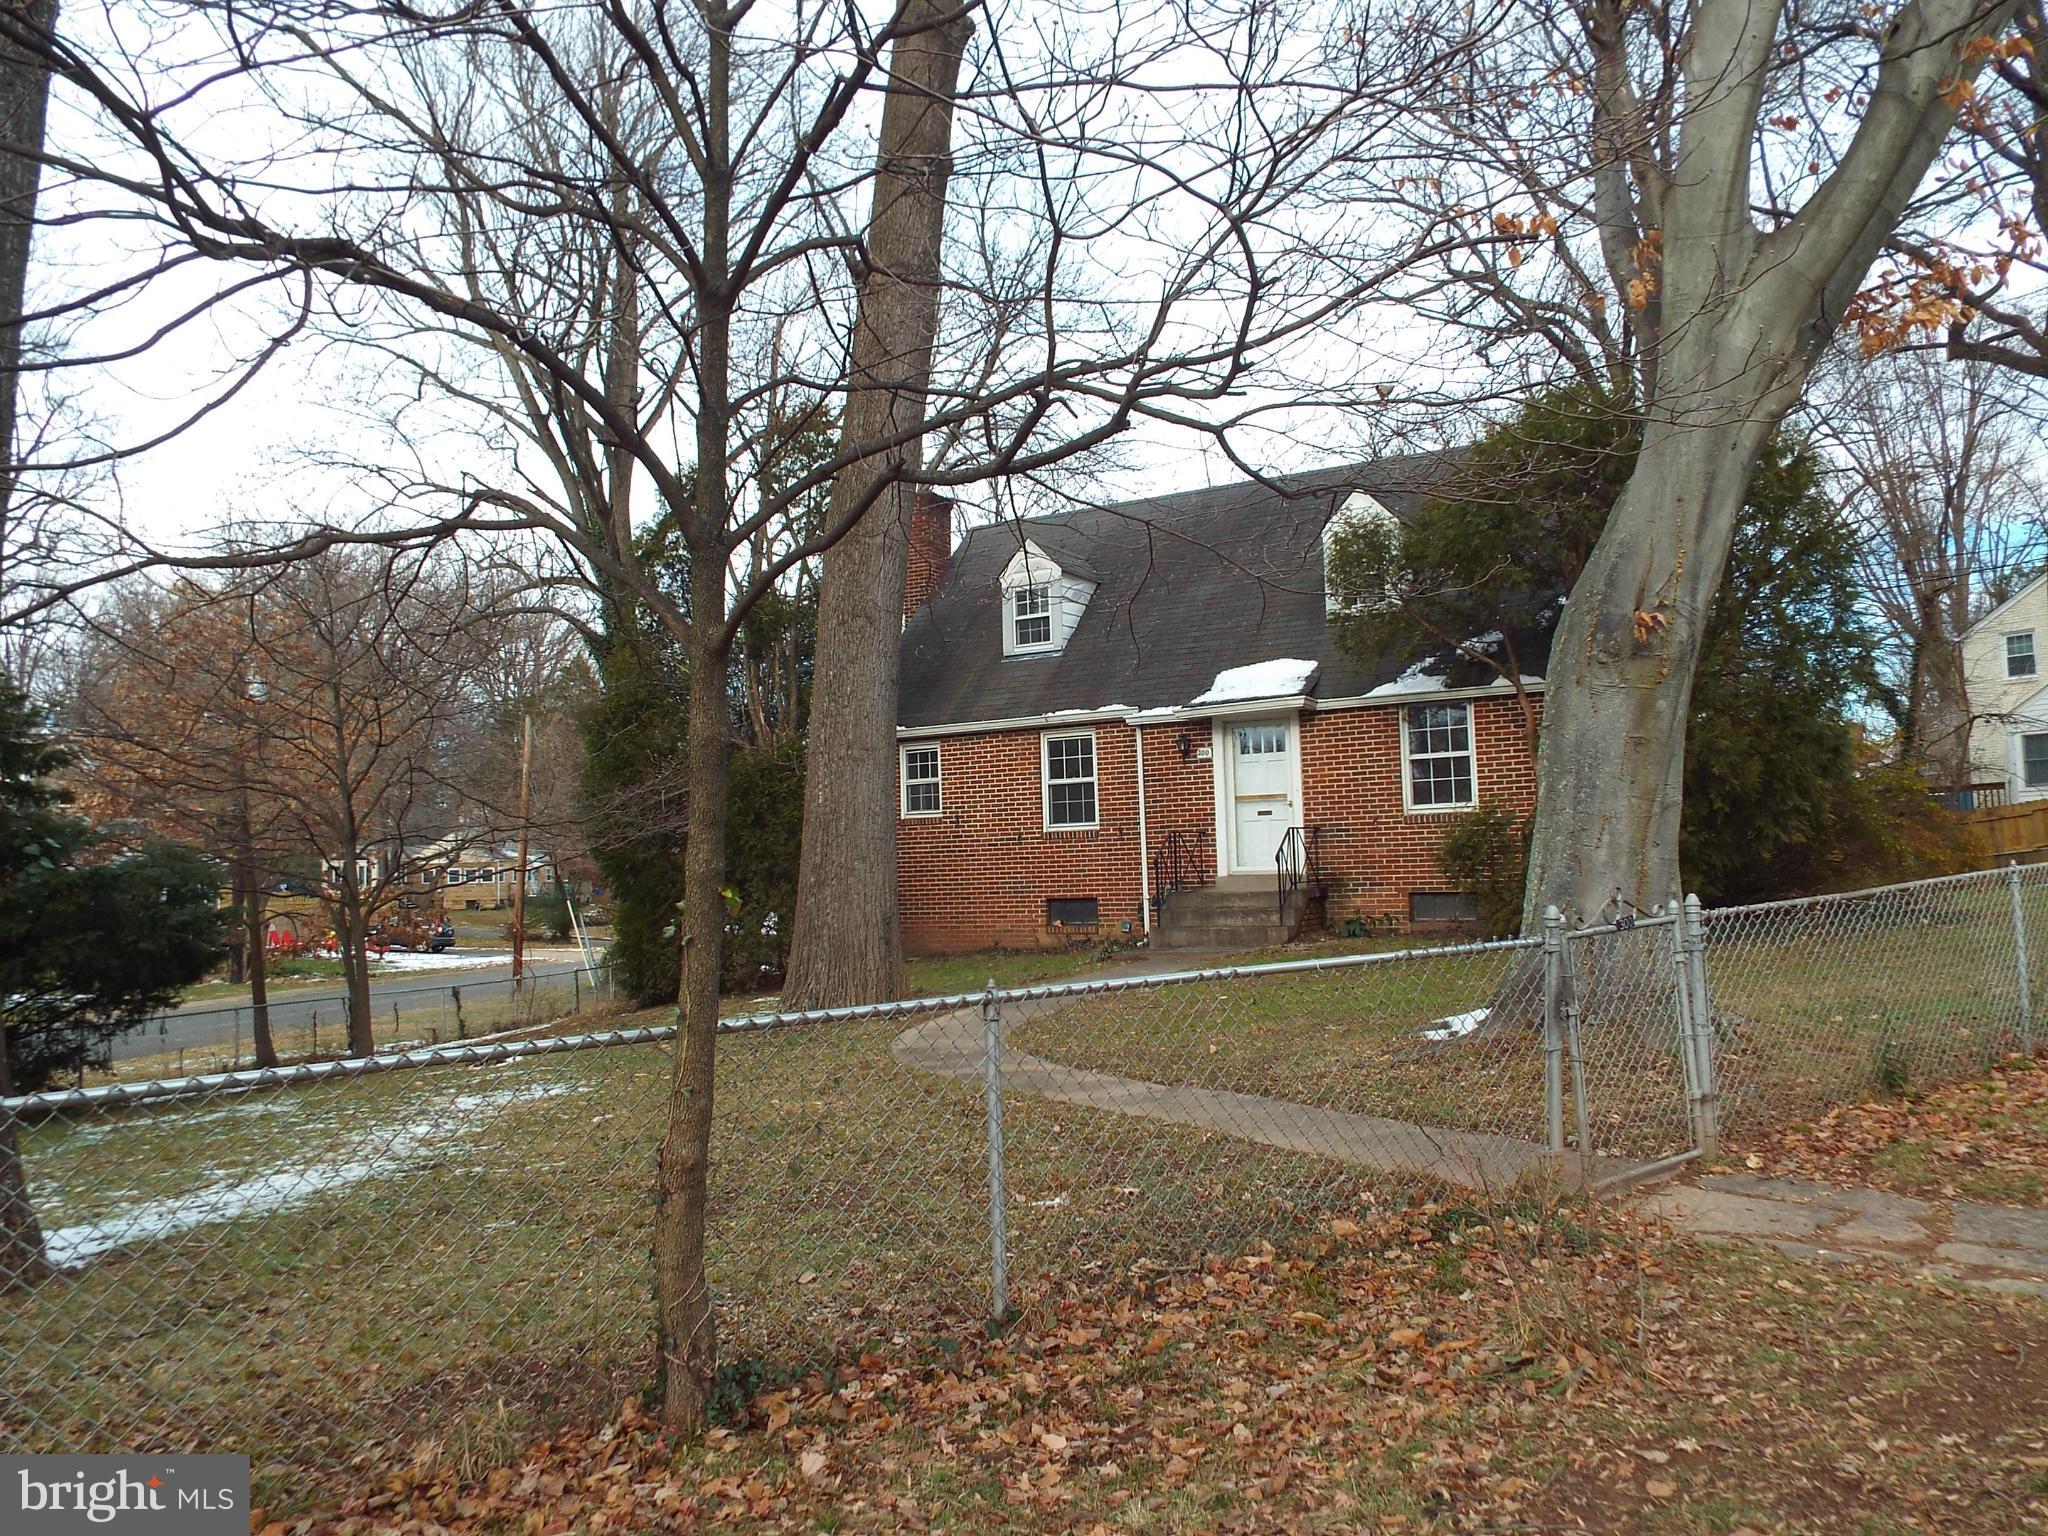 a view of a large trees in front of a house